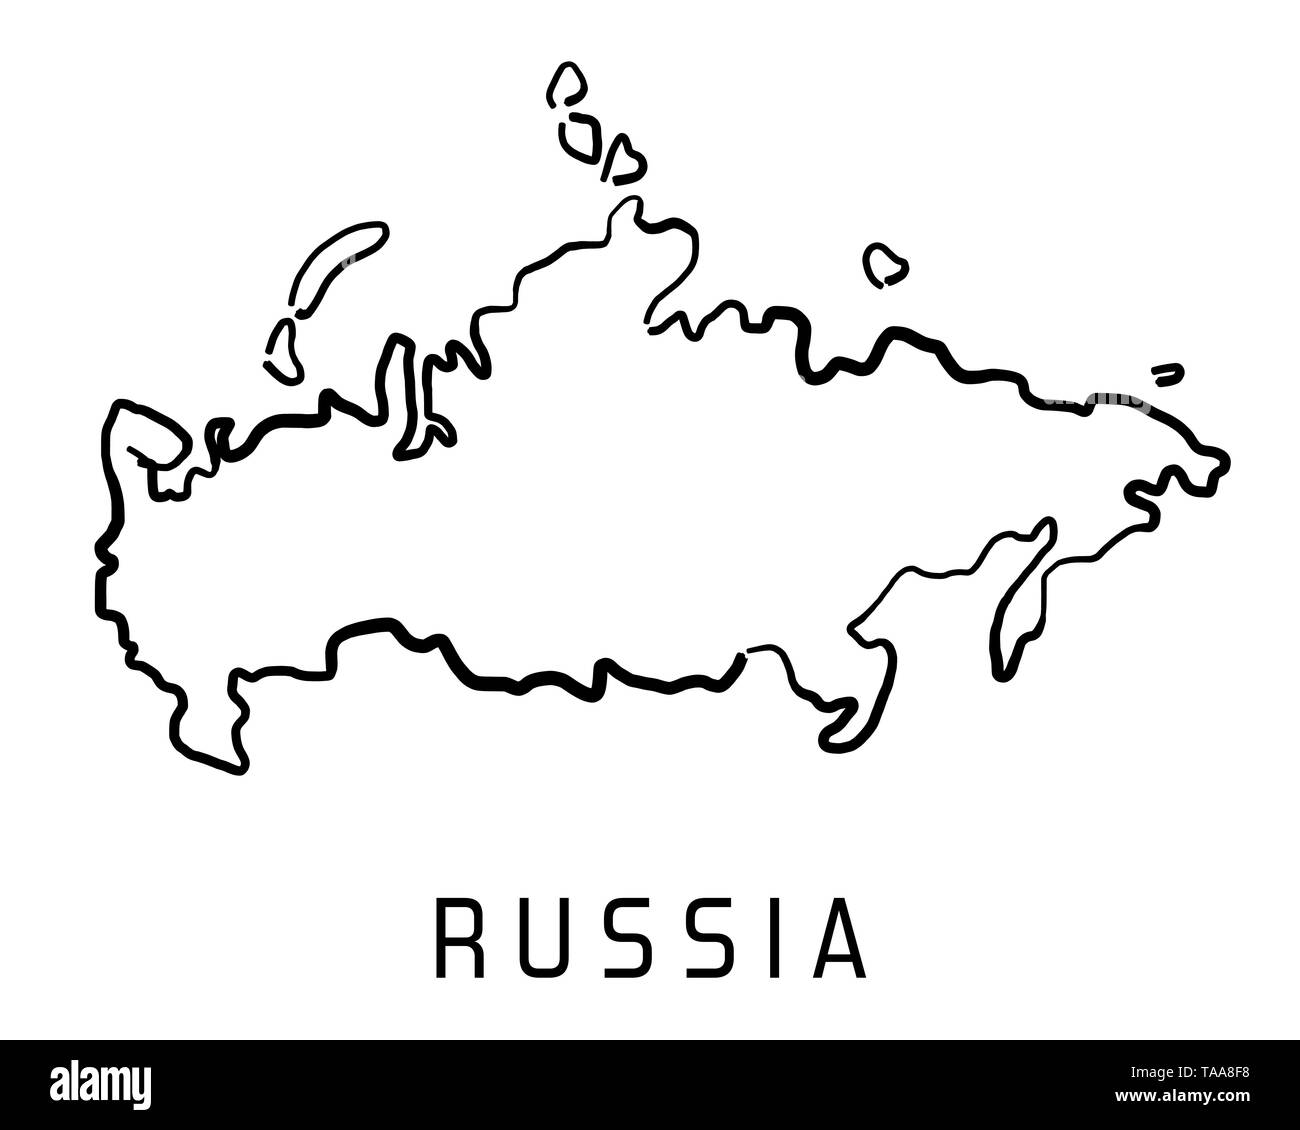 Russia map outline - smooth simplified country shape map vector. Stock Vector